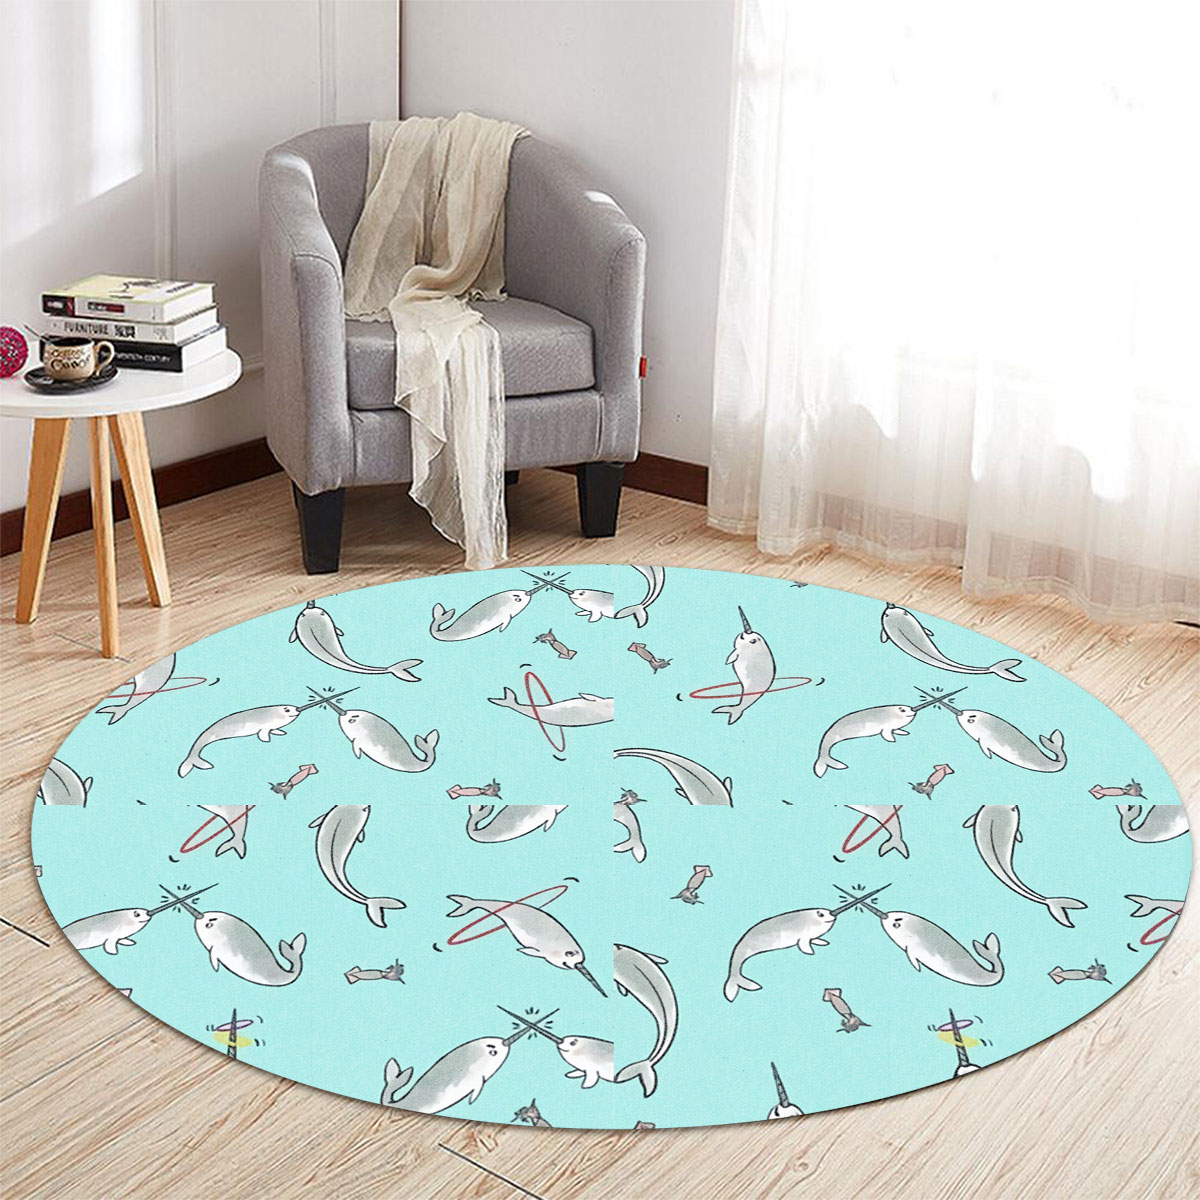 Grey Narwhal On Blue Round Carpet